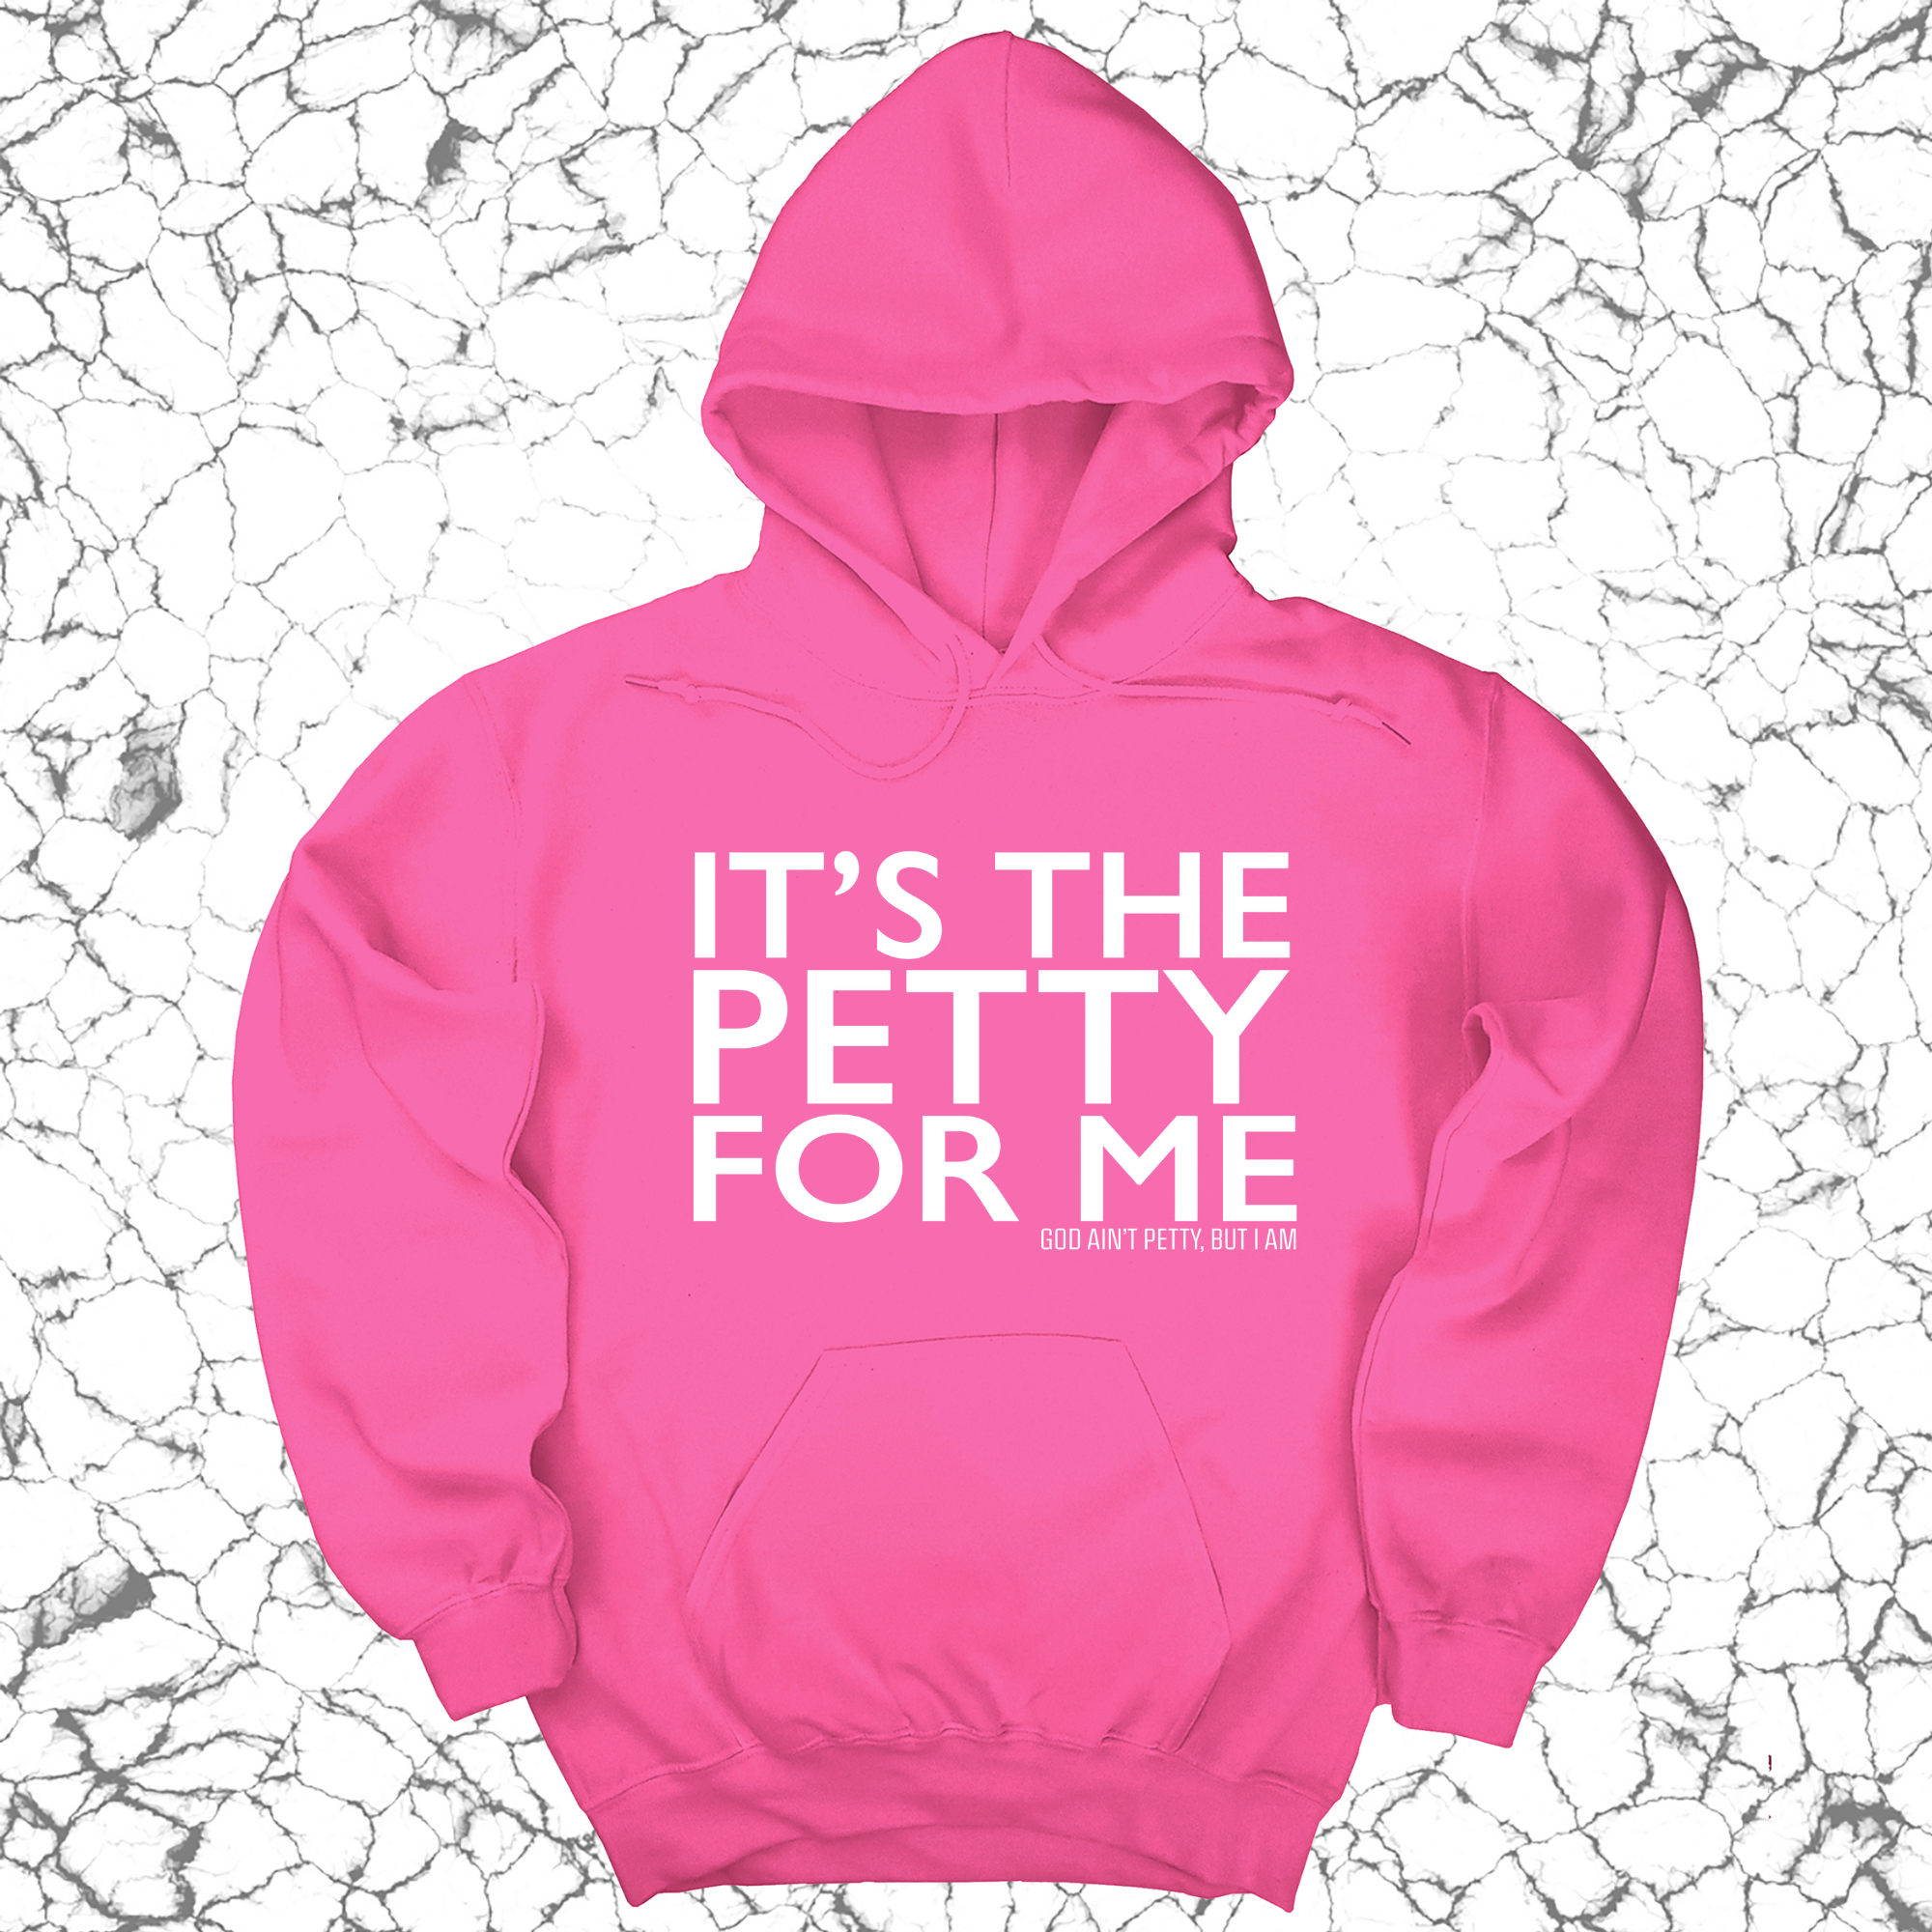 It's the Petty for me Unisex Hoodie-Hoodie-The Original God Ain't Petty But I Am